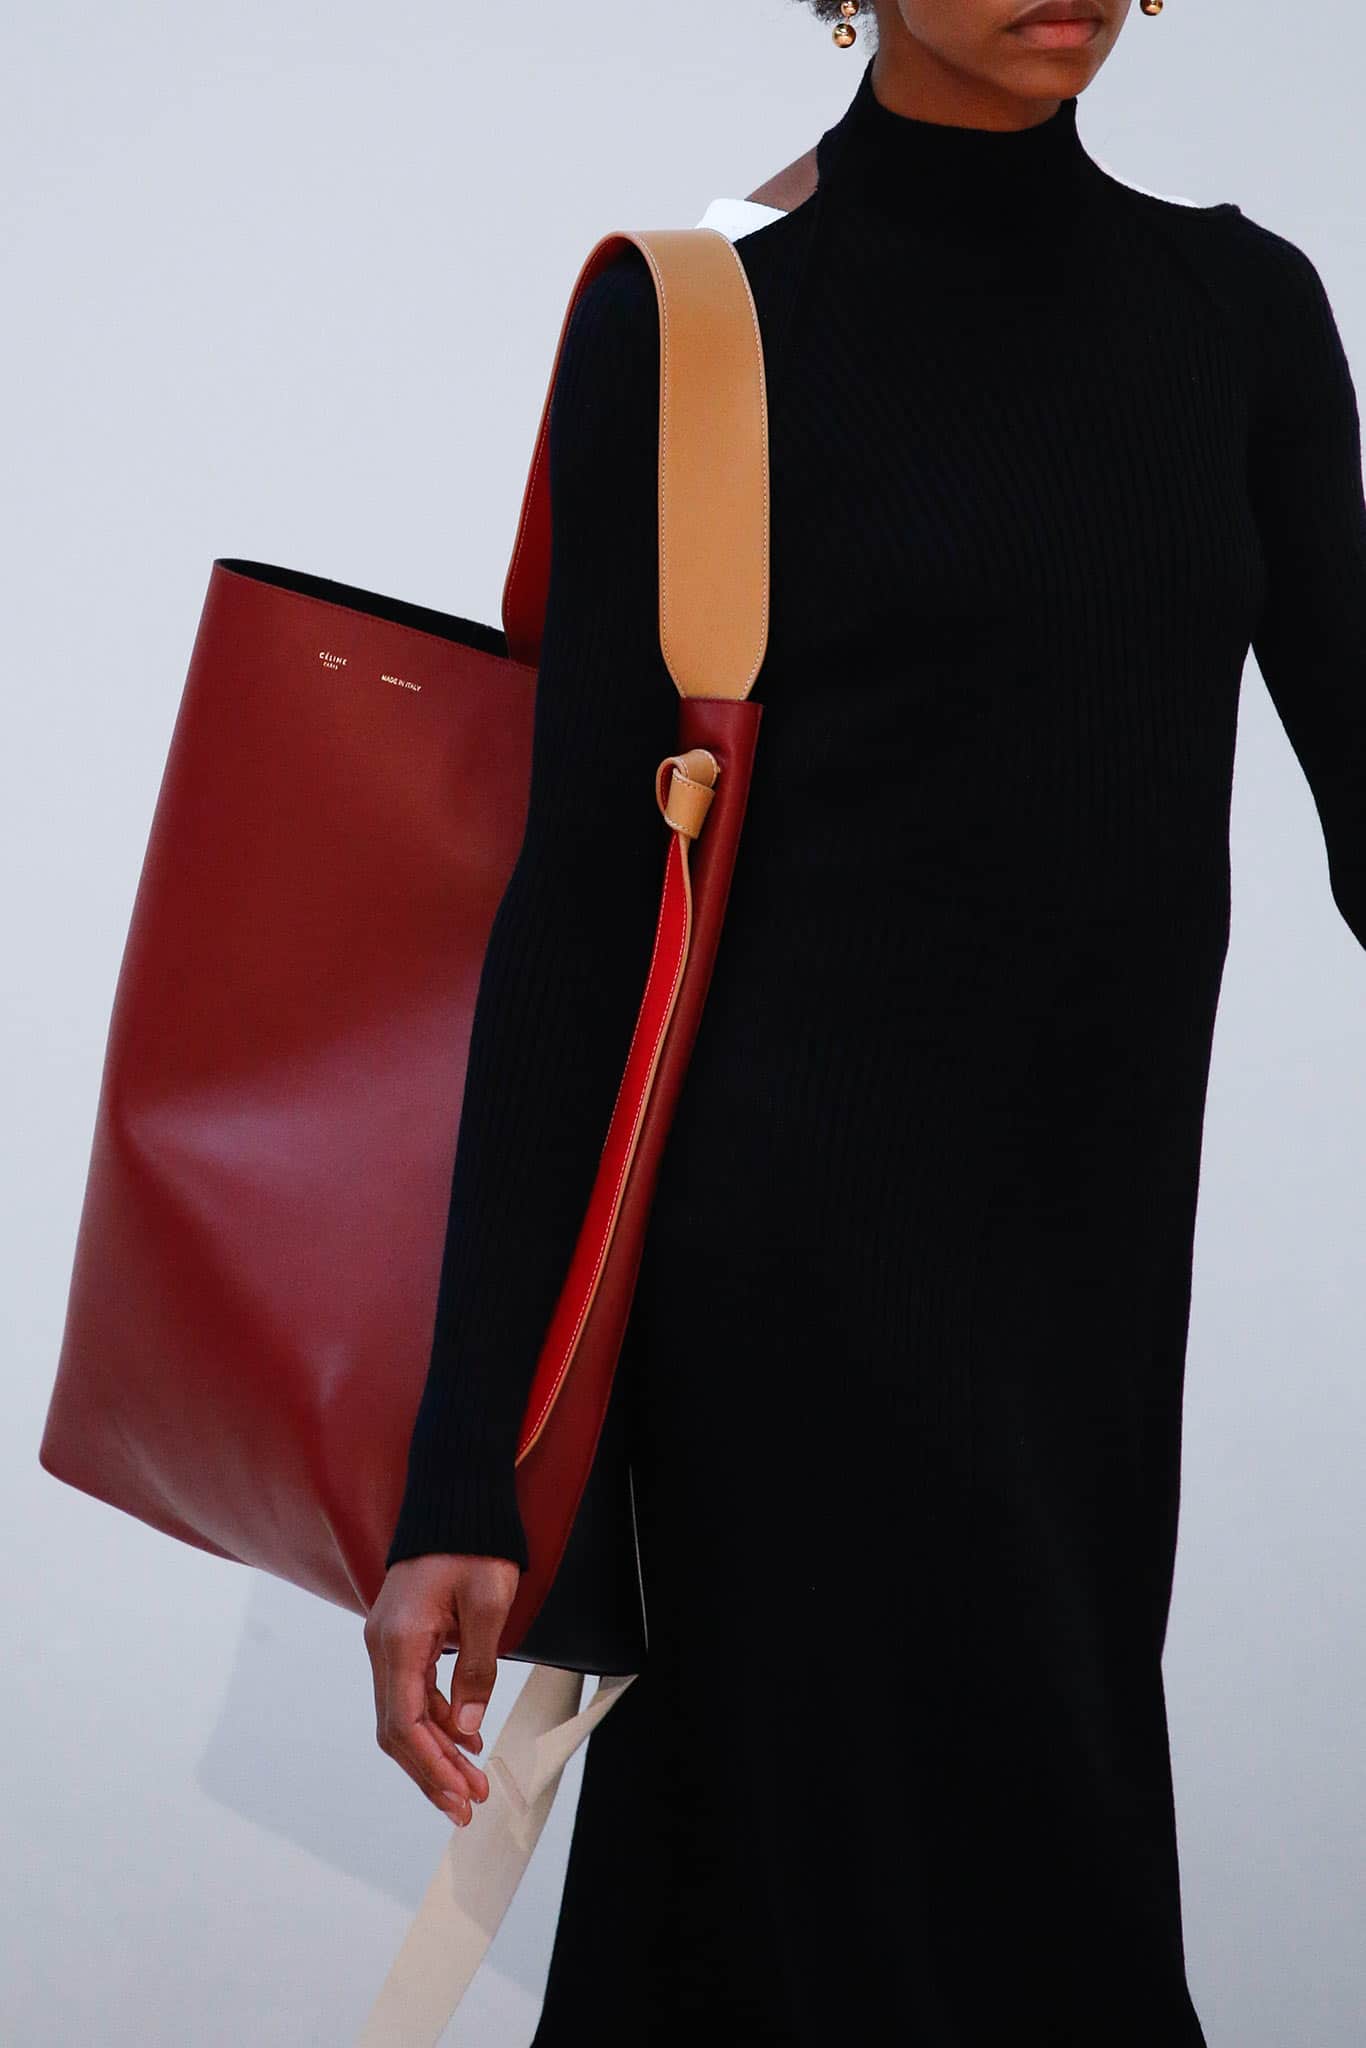 Celine Fall/Winter 2015 Runway Bag Collection Featuring Large Tote ...  